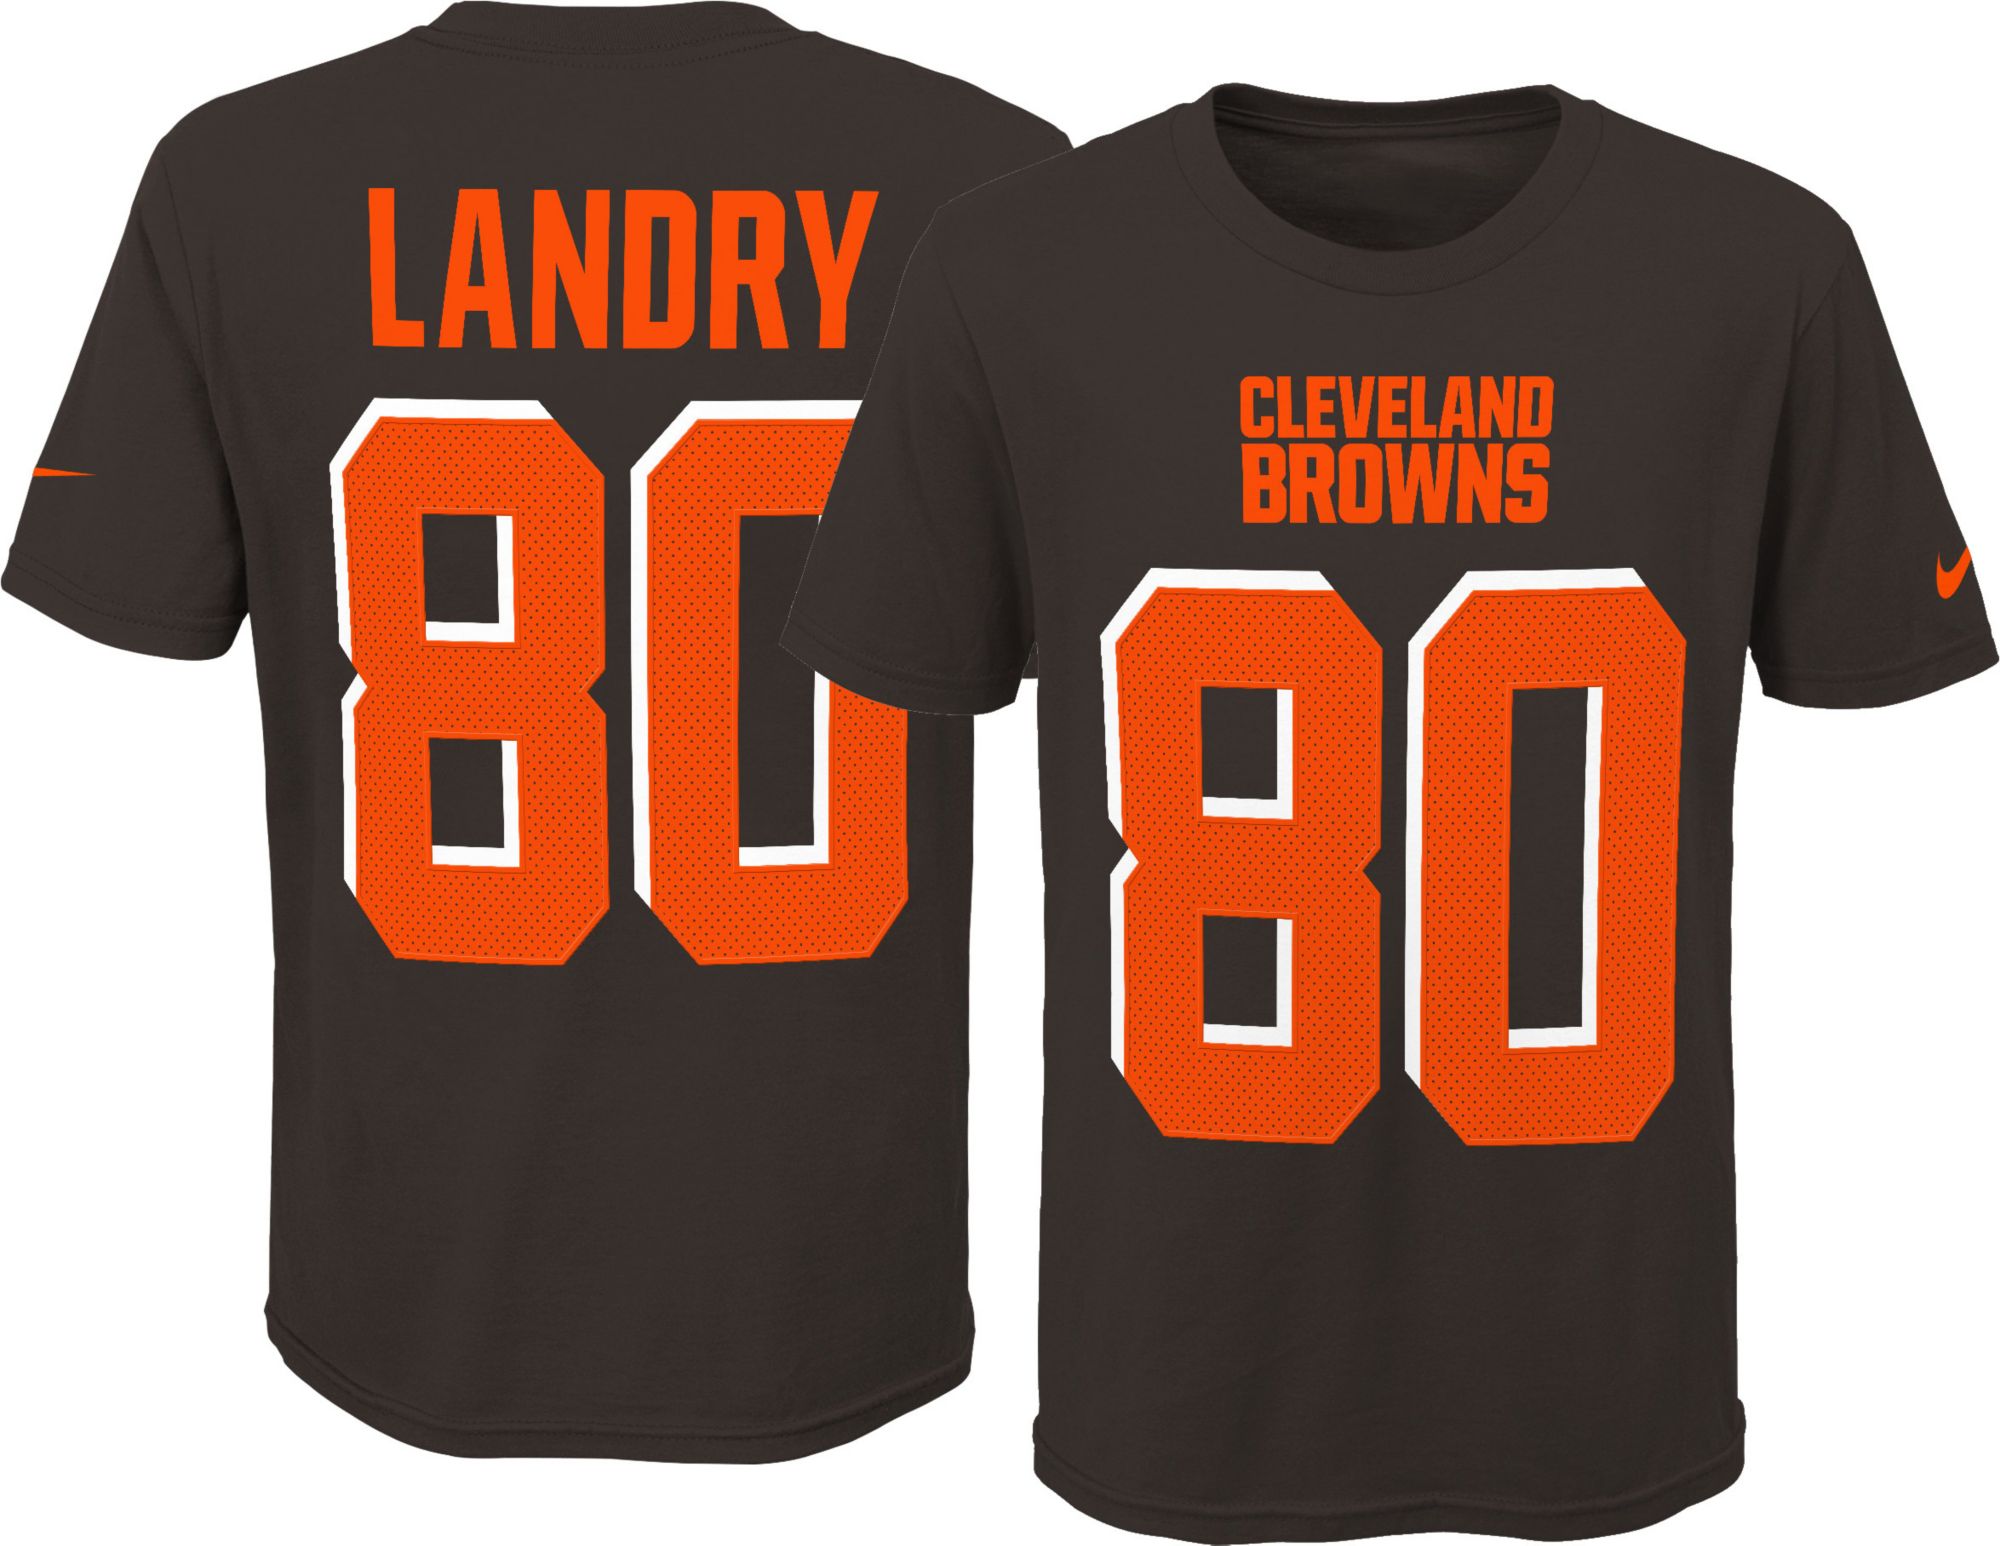 jarvis landry youth jersey